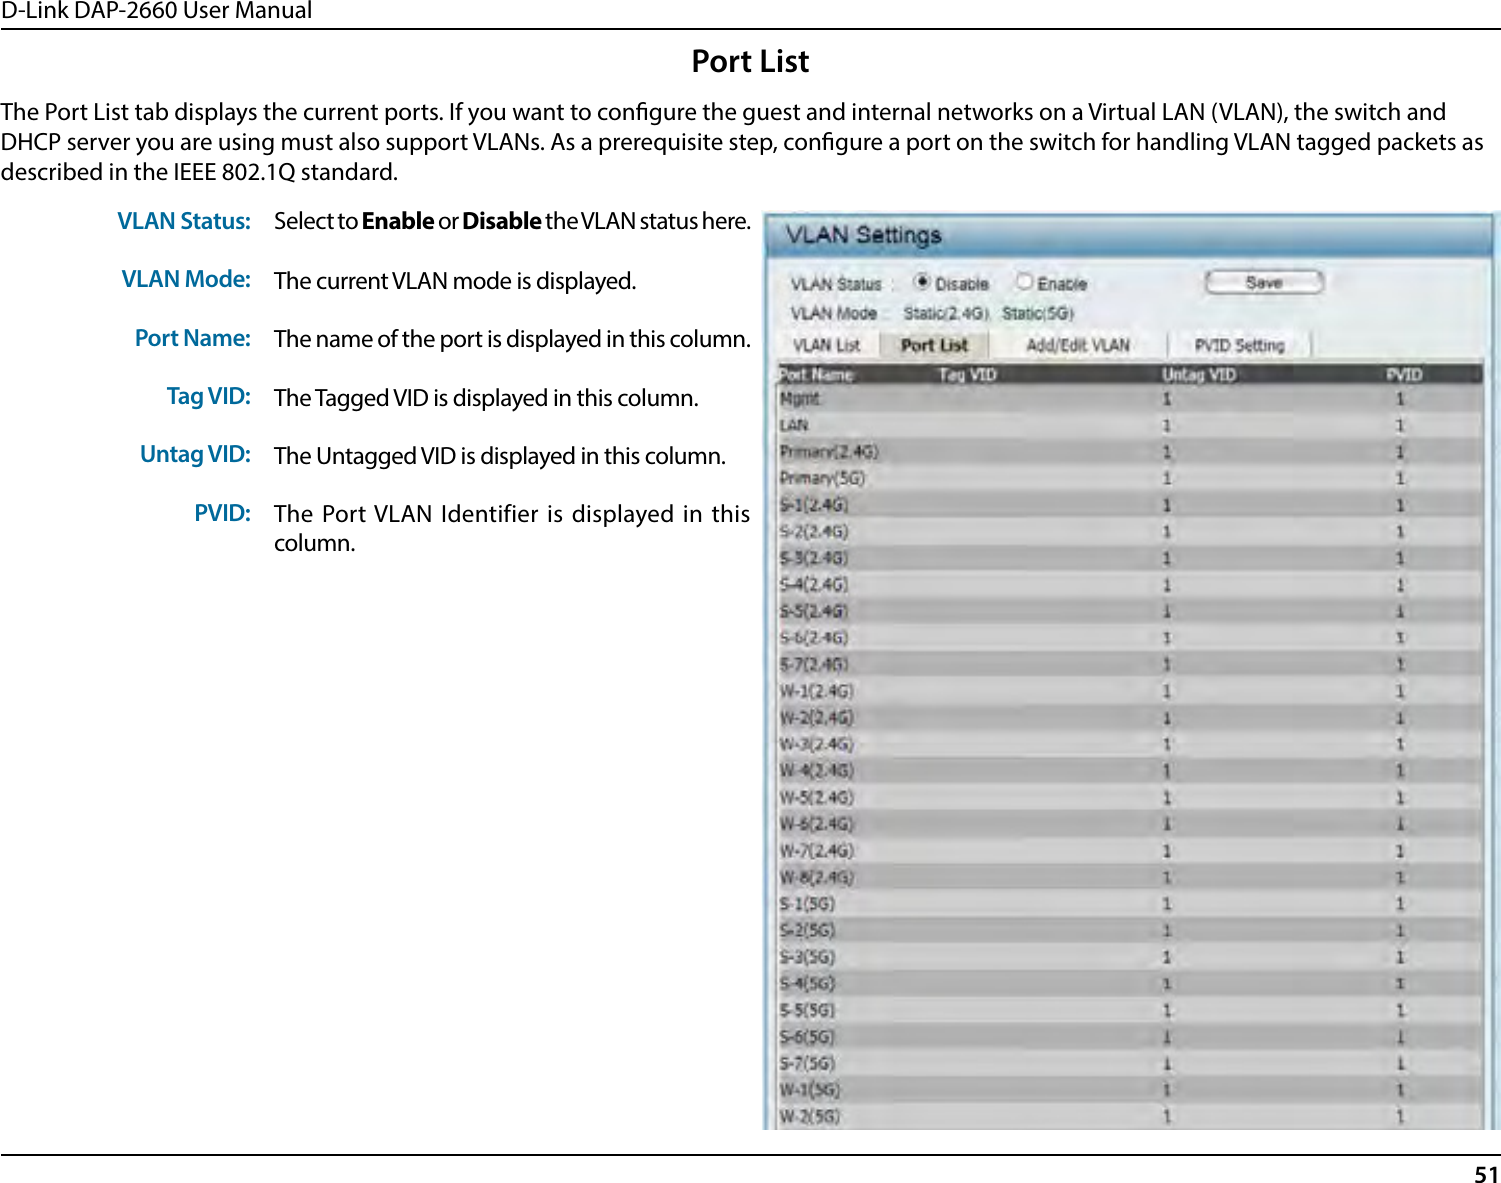 D-Link DAP-2660 User Manual51The Port List tab displays the current ports. If you want to congure the guest and internal networks on a Virtual LAN (VLAN), the switch and DHCP server you are using must also support VLANs. As a prerequisite step, congure a port on the switch for handling VLAN tagged packets as described in the IEEE 802.1Q standard.VLAN Status:VLAN Mode:Port Name:Tag VID:Untag VID:PVID:Select to Enable or Disable the VLAN status here.The current VLAN mode is displayed.The name of the port is displayed in this column.The Tagged VID is displayed in this column.The Untagged VID is displayed in this column.The Port VLAN Identifier is displayed in this column.Port List